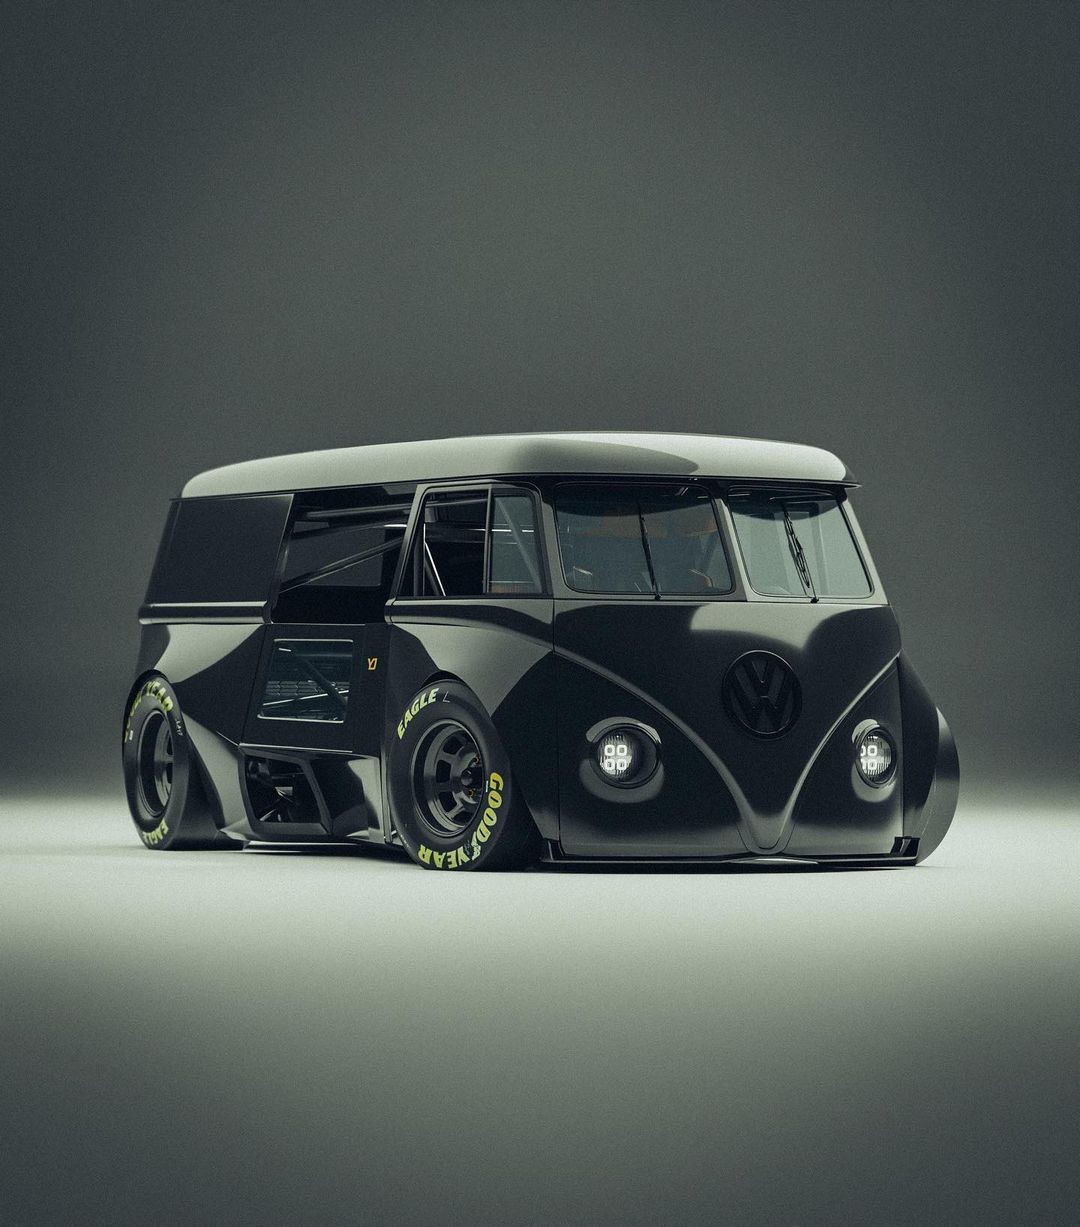 Volkswagen Bus Gets a CGI Steroid Shot, Becomes a True Mid-Engine